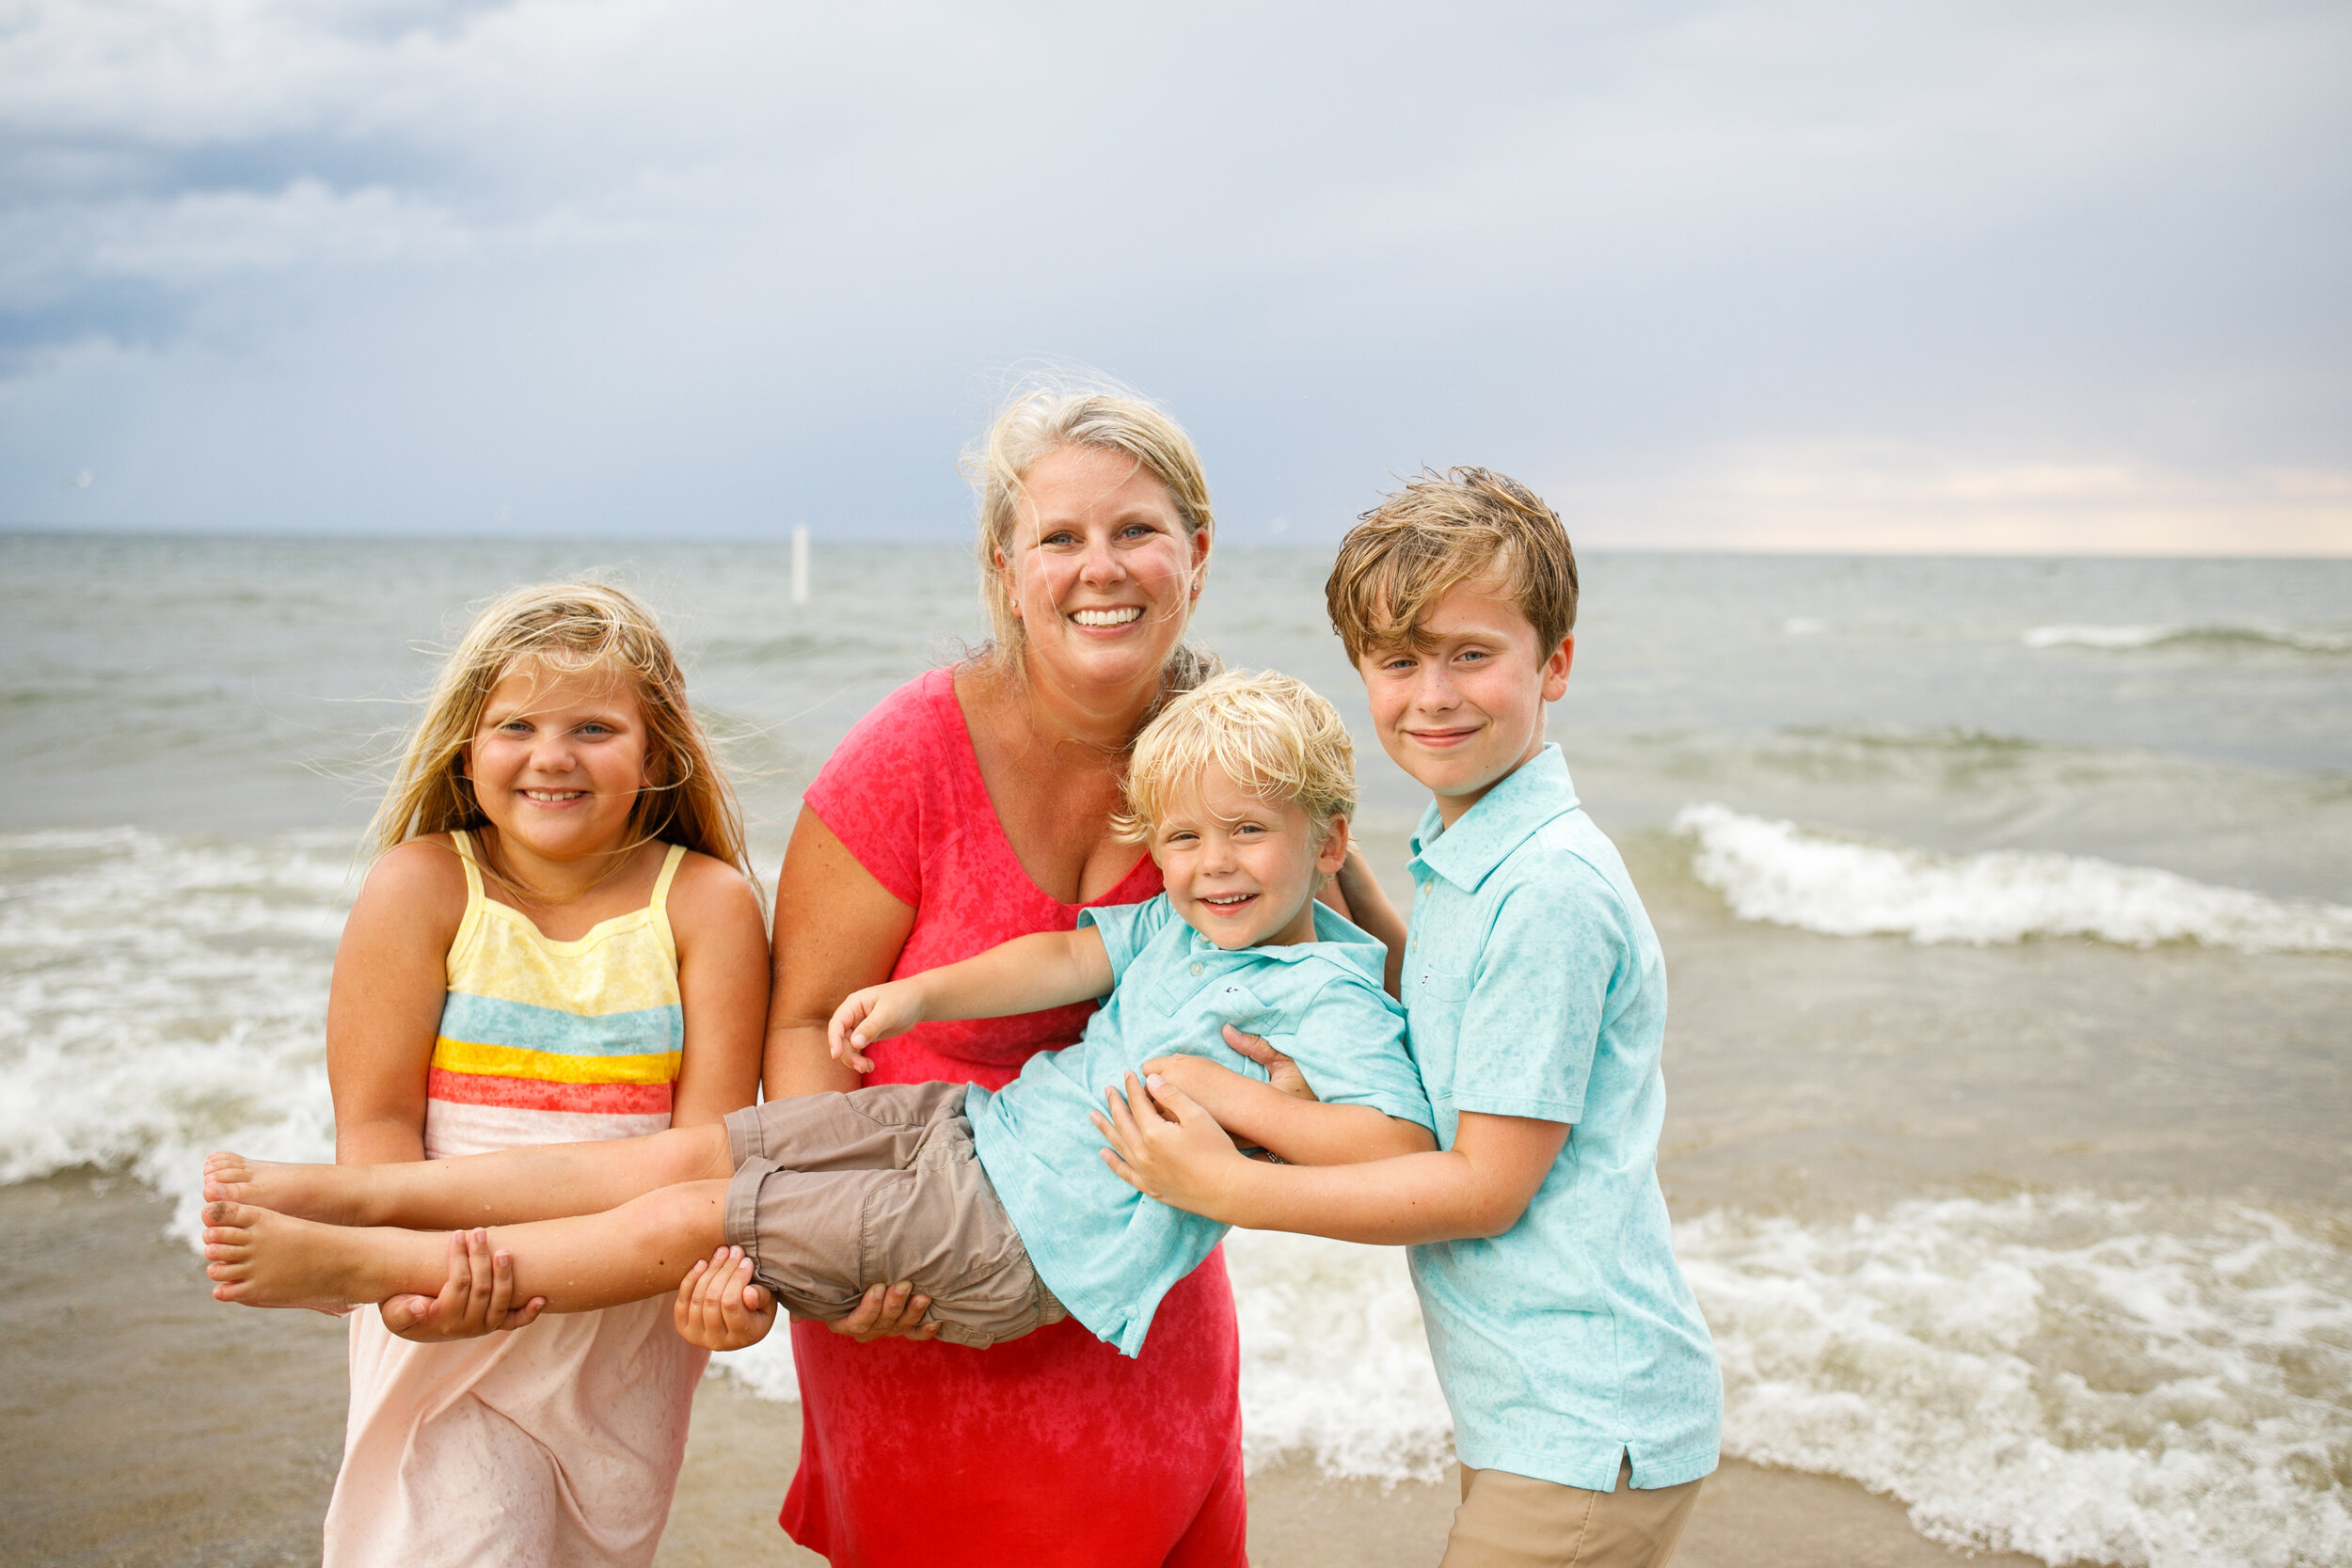 Murphy Family - Saugatuck Family Session - Oval Beach Family Session - Grand Rapids Photographer - Saugatuck Photographer - J Darling Photo 026.jpg